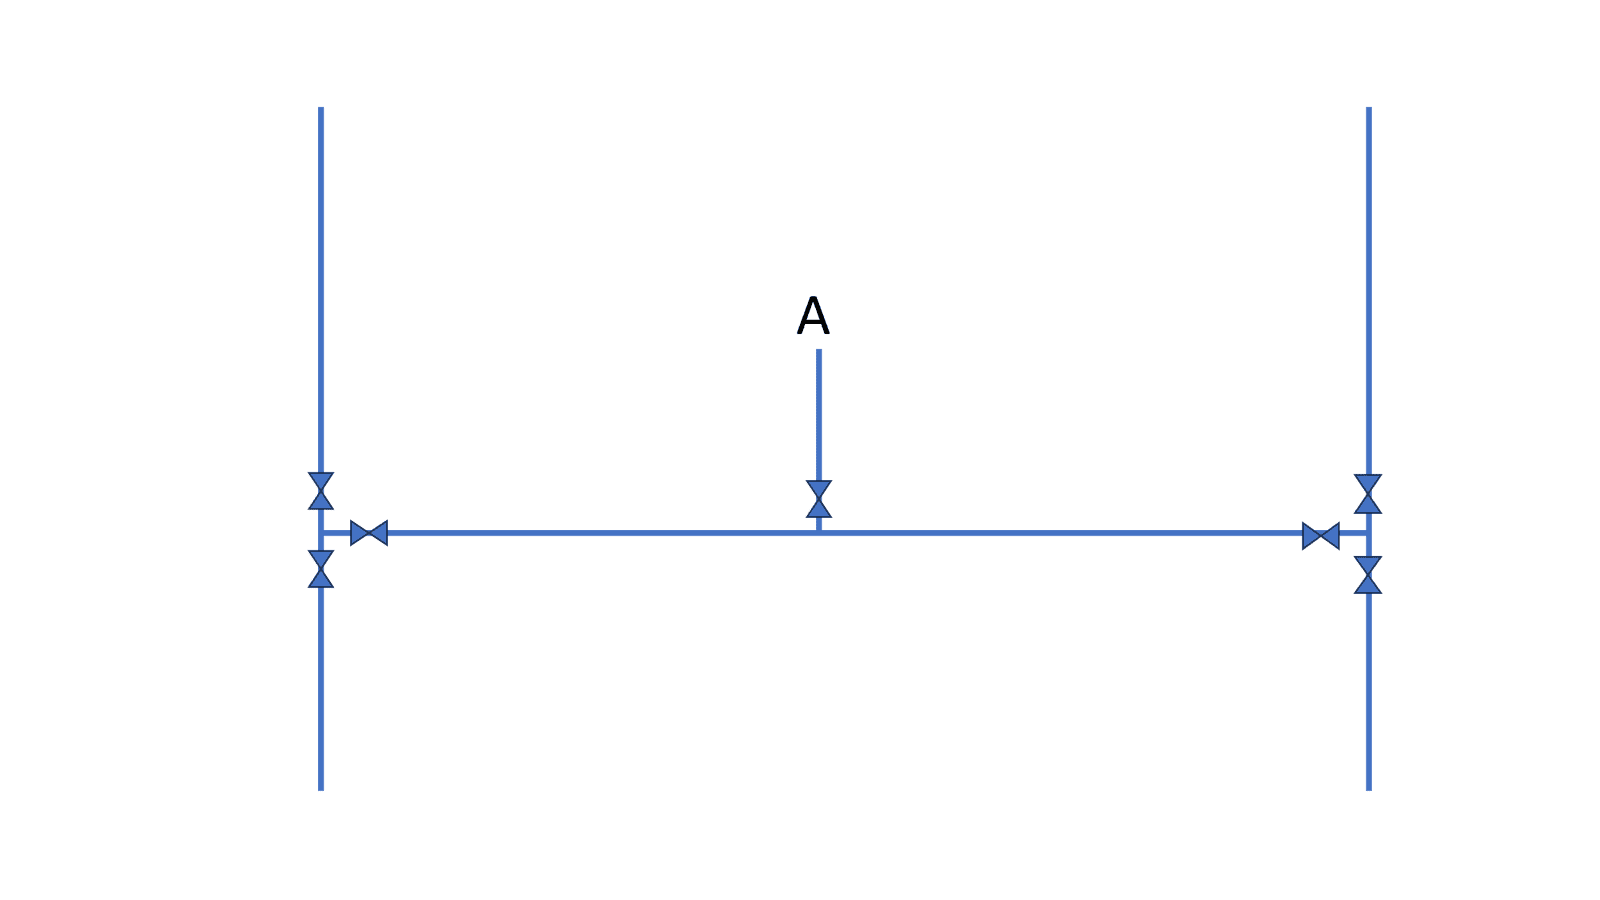 Diagram of a critical customer A being fed from two directions